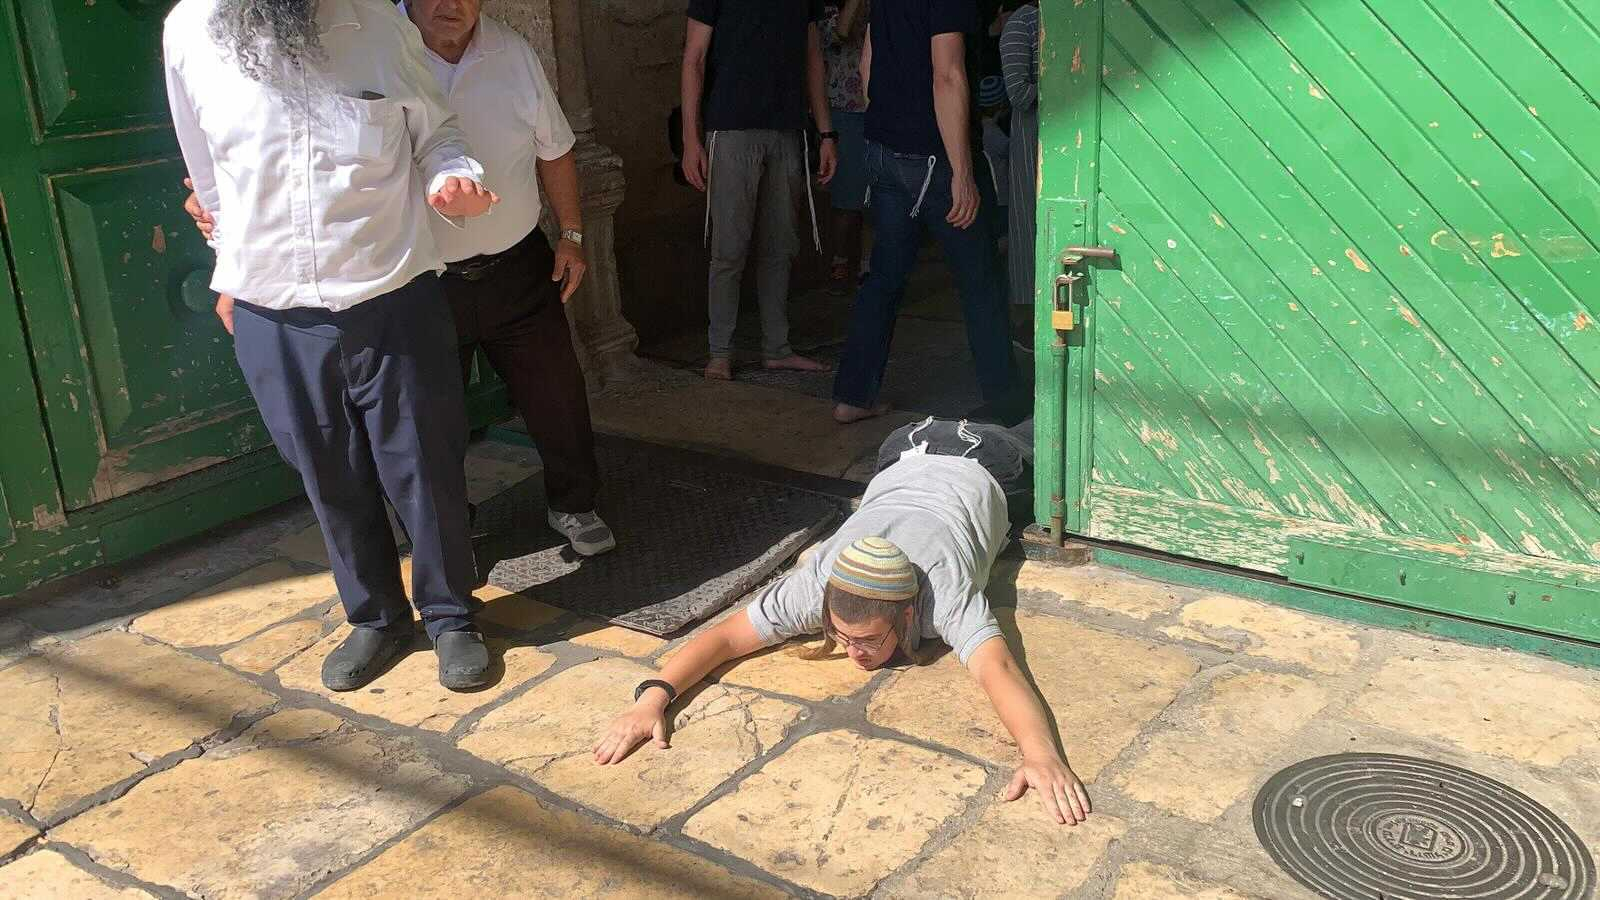 A settler breaks into al-Aqsa Mosque compound on Sunday (MEE)